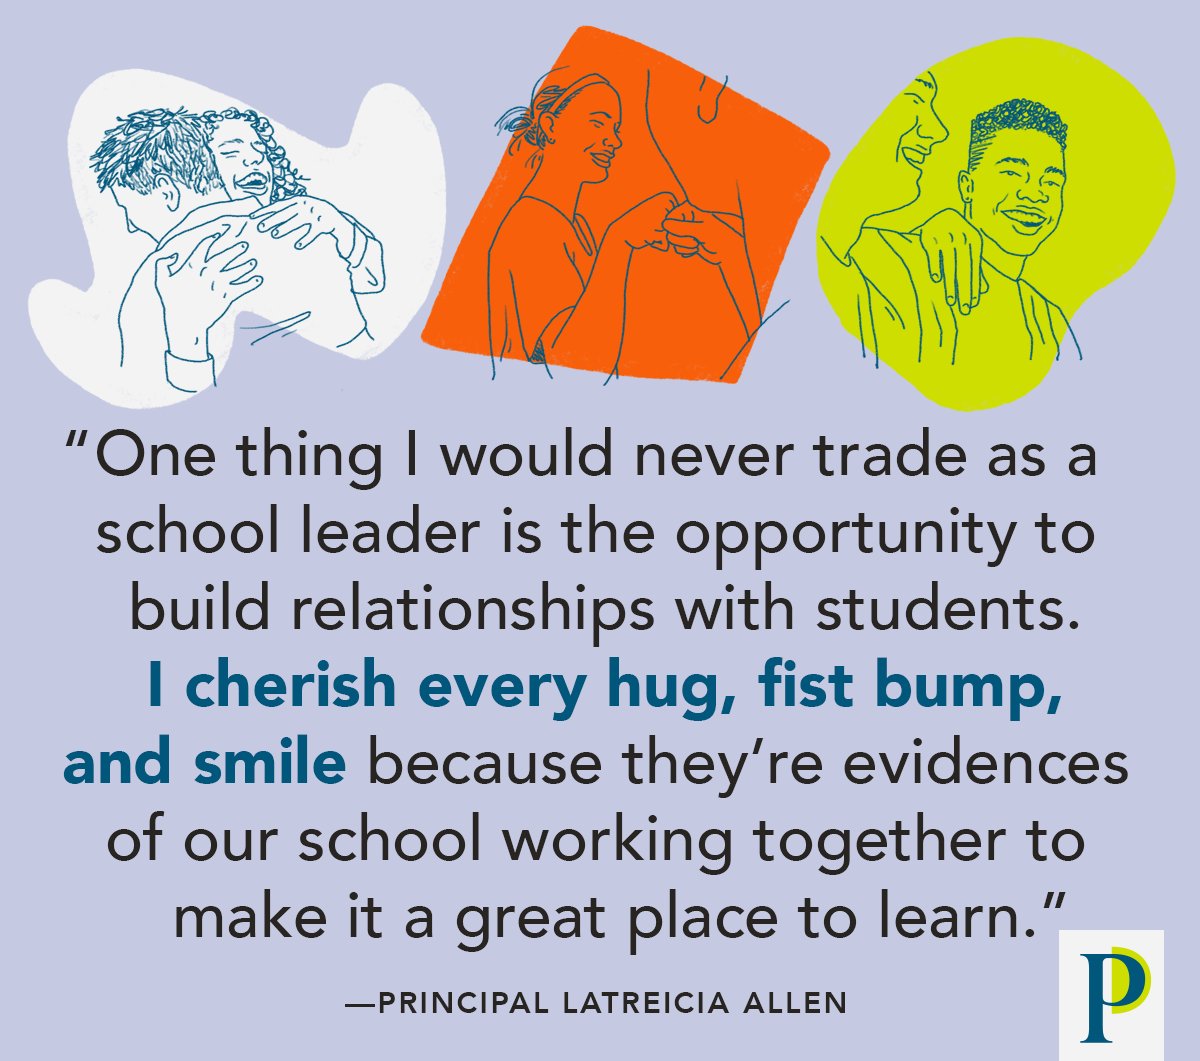 Every fist bump, every smile, every connection – it all adds up, leaders. Thank you. (Inspiration via P @LatreiciaAllen)